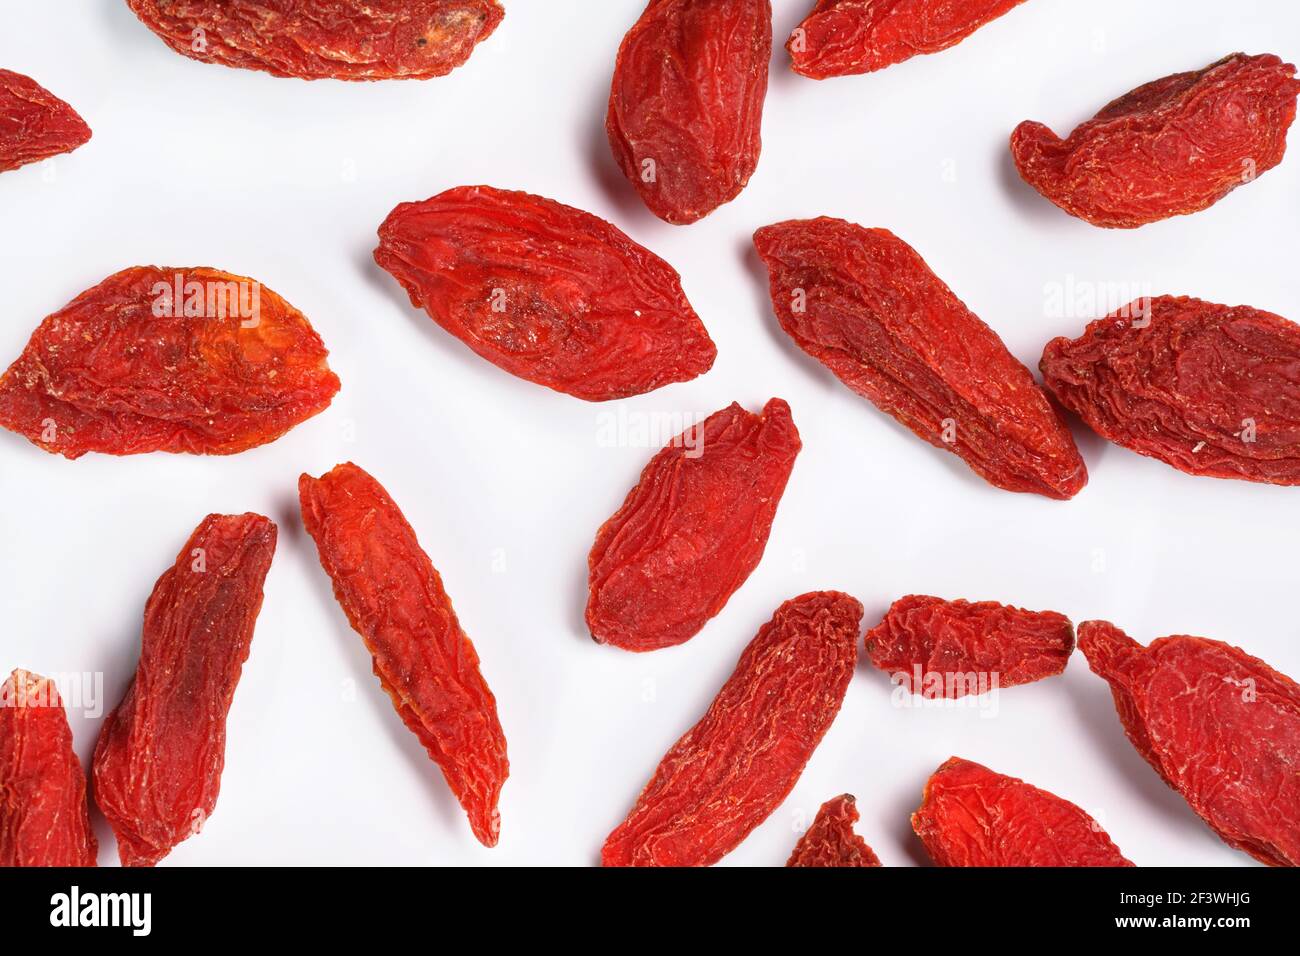 Closeup photo of goji berry (wolfberry - Lycium chinense) dried fruits isolated on white background, view from above Stock Photo